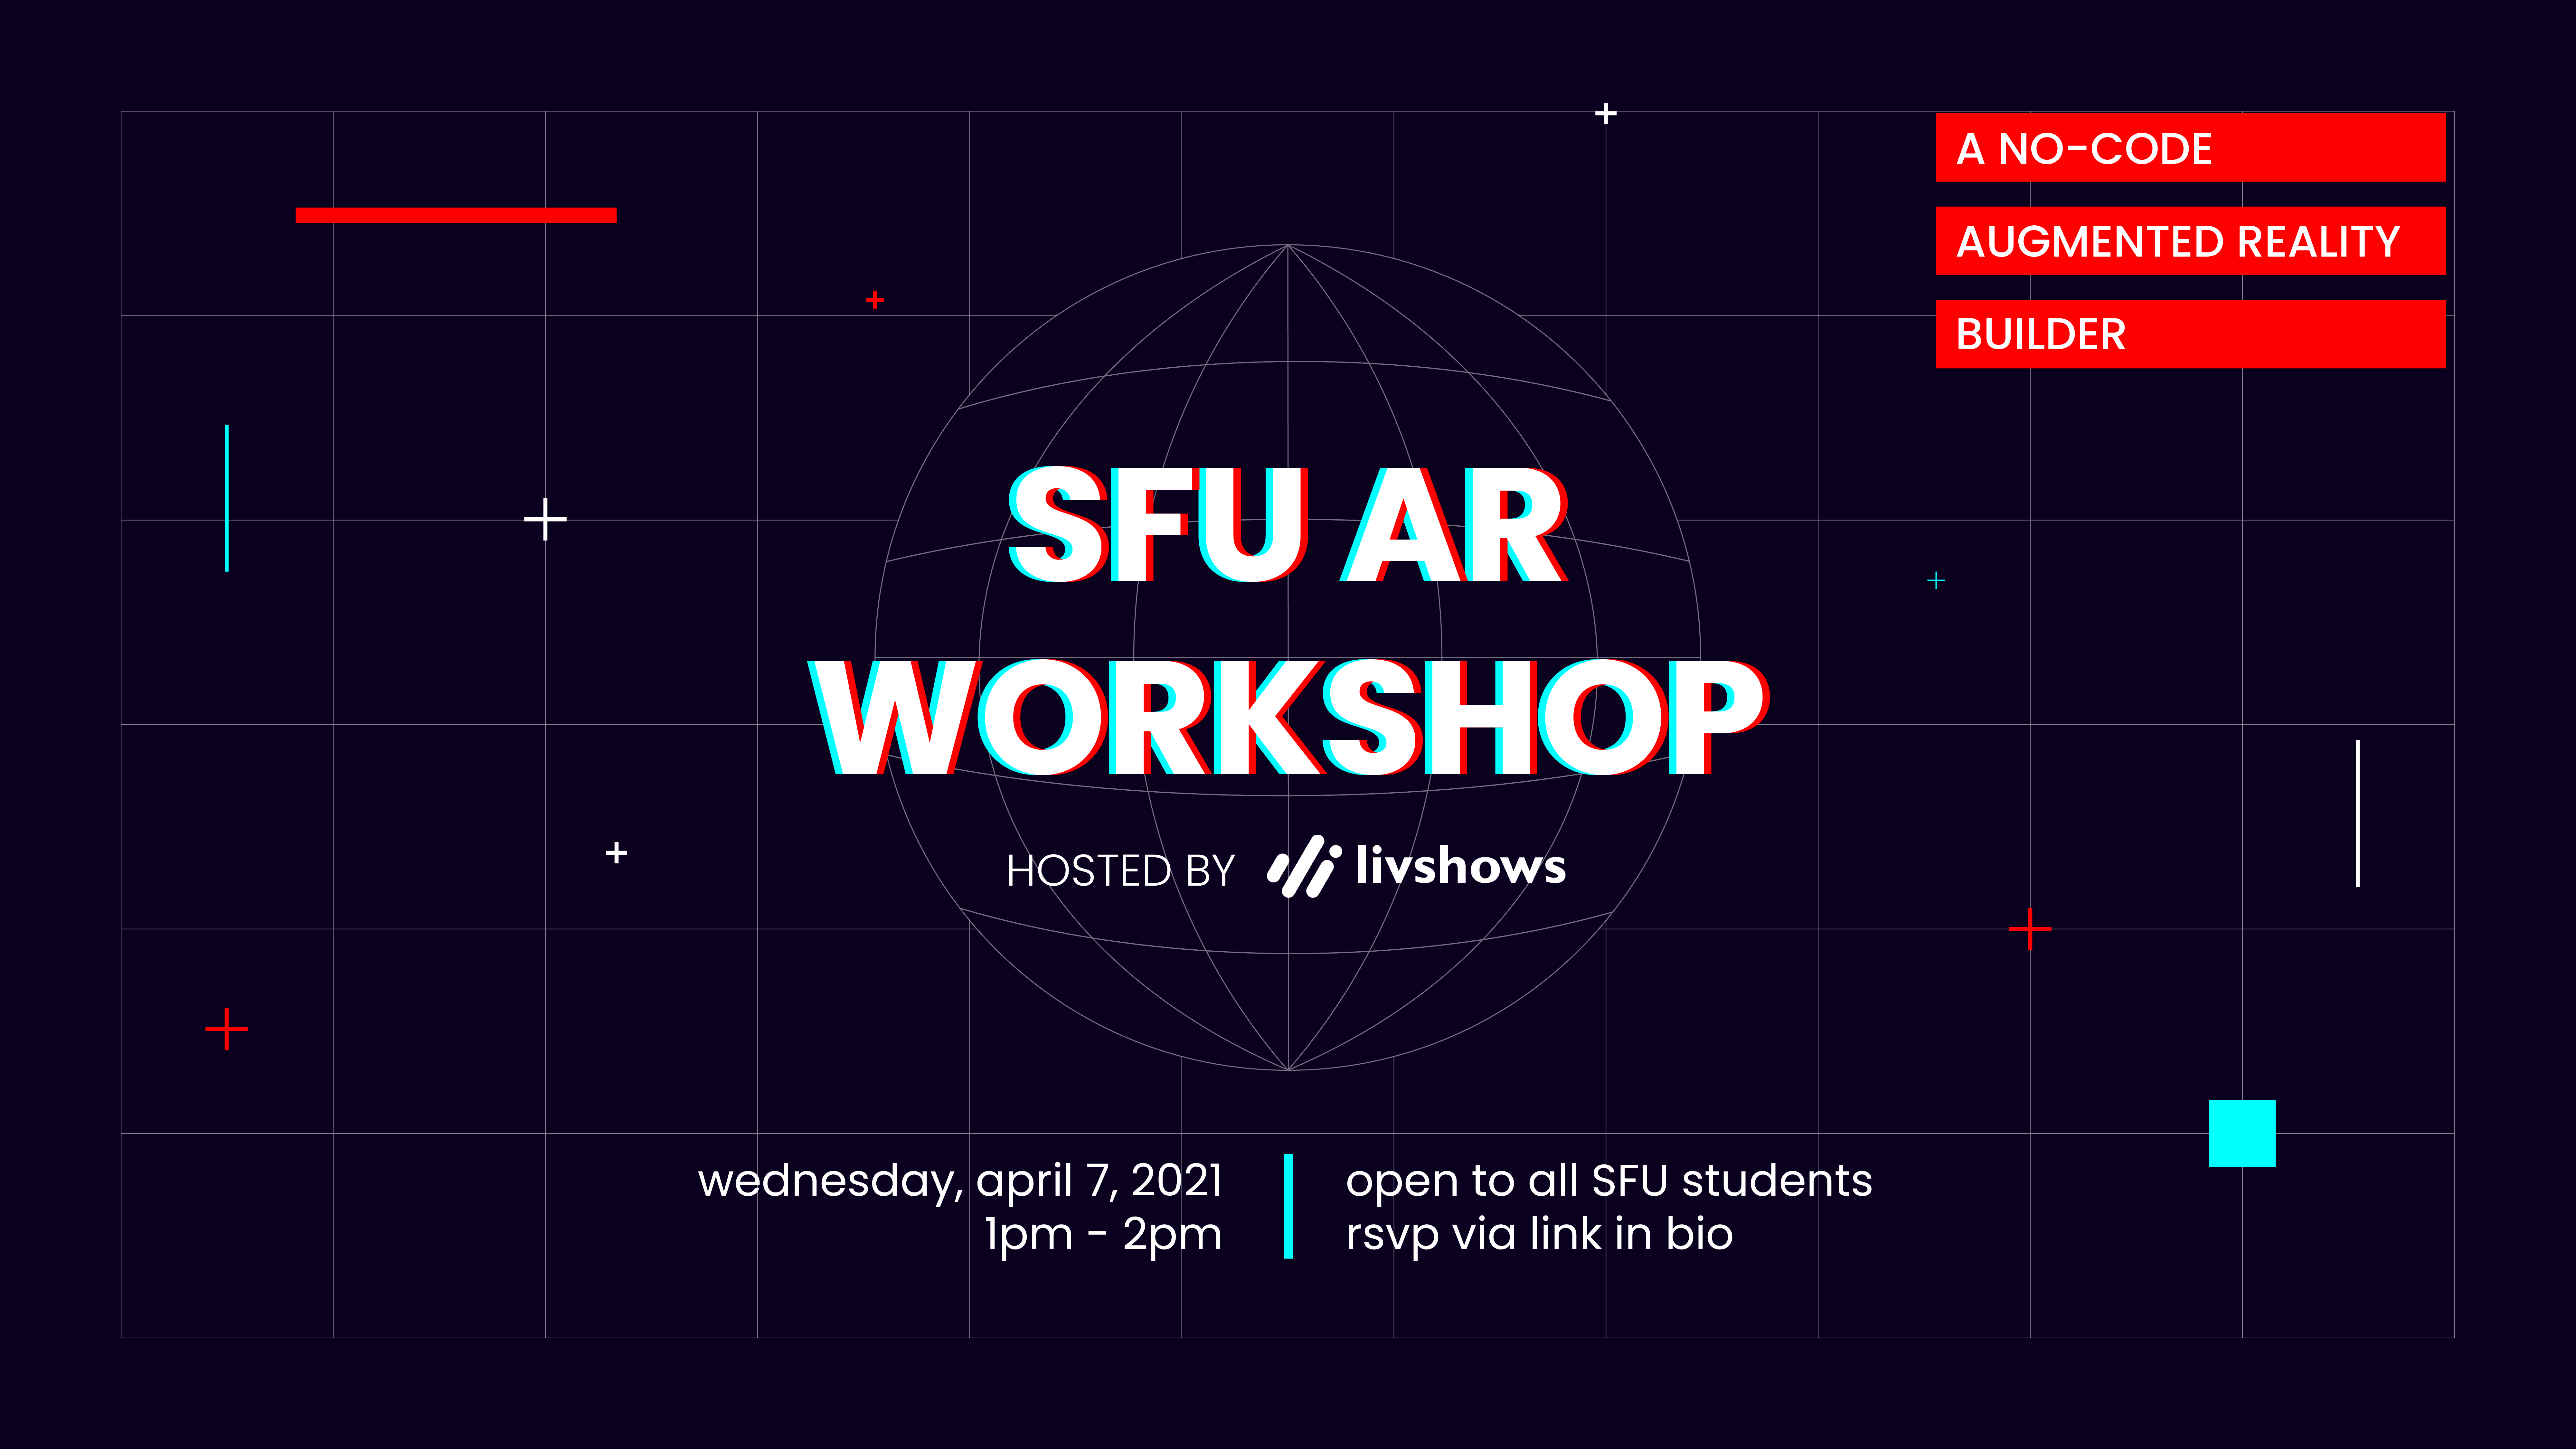 SFU AR Workshop - hosted by LivShows